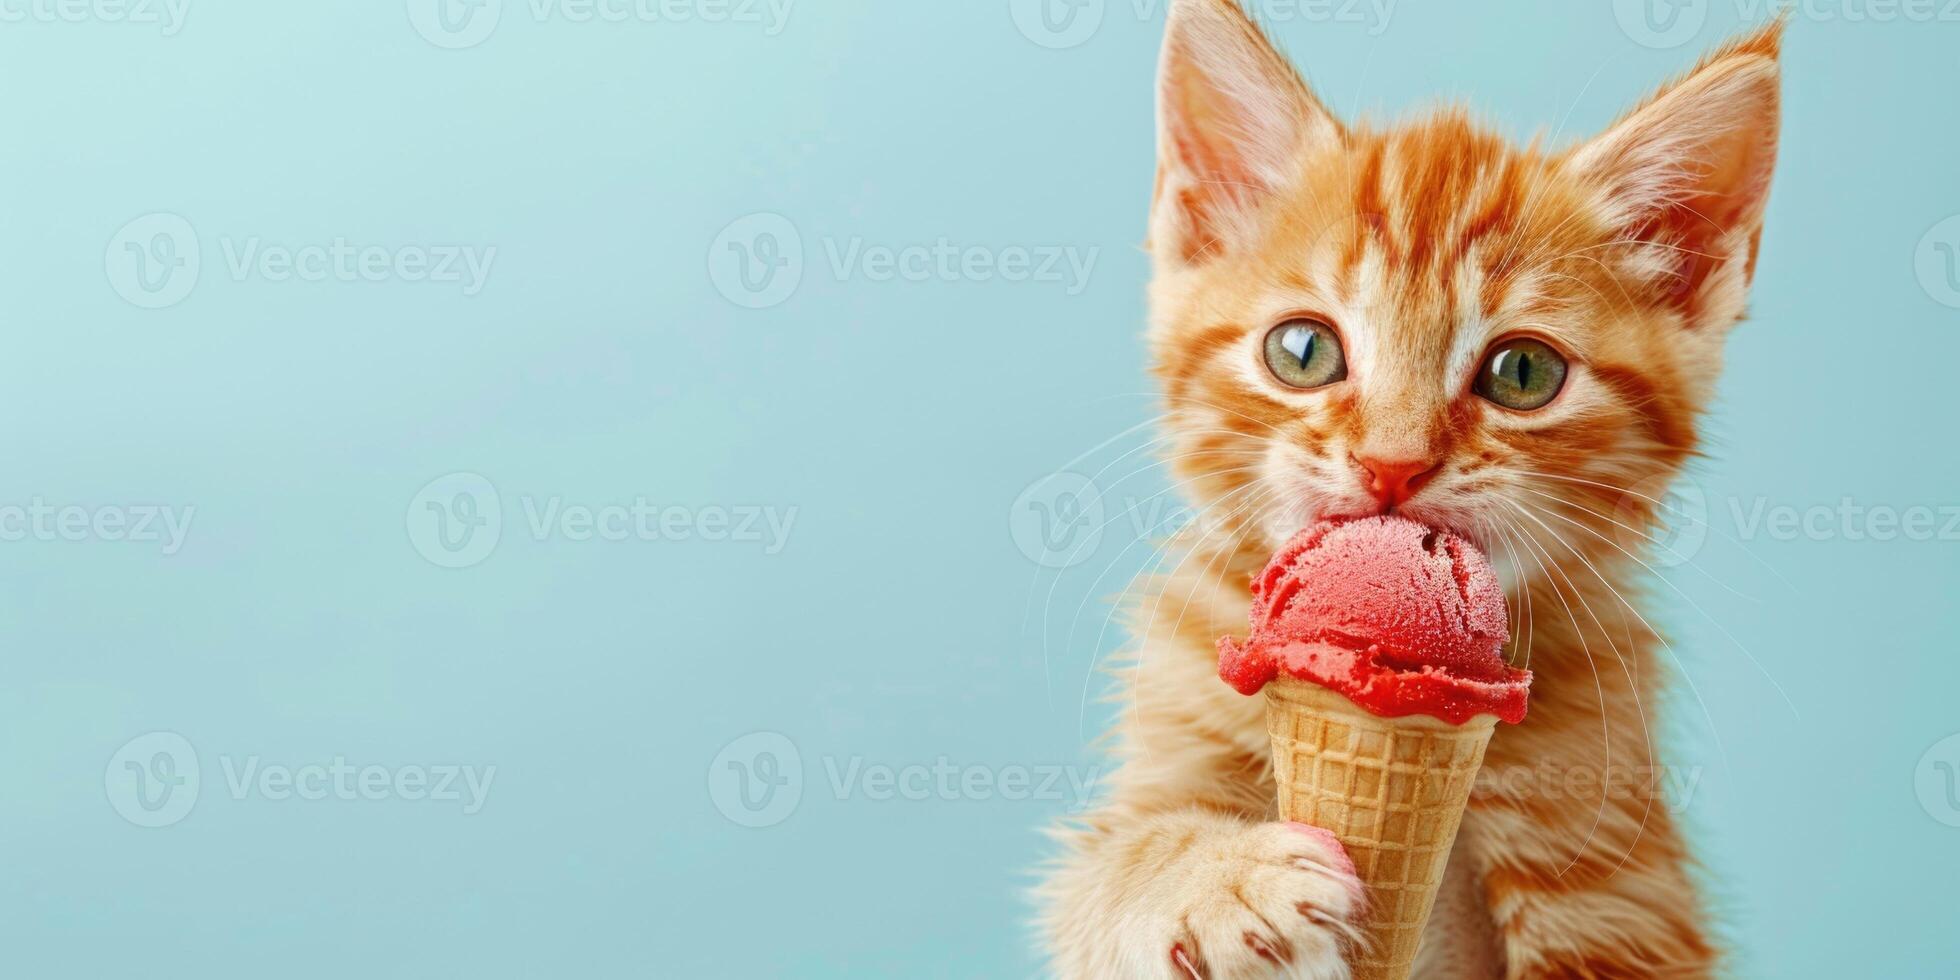 Cat with ice cream on empty blue background with copy space. Kitten licks ice cream in a cone. Cute summer banner with pet photo